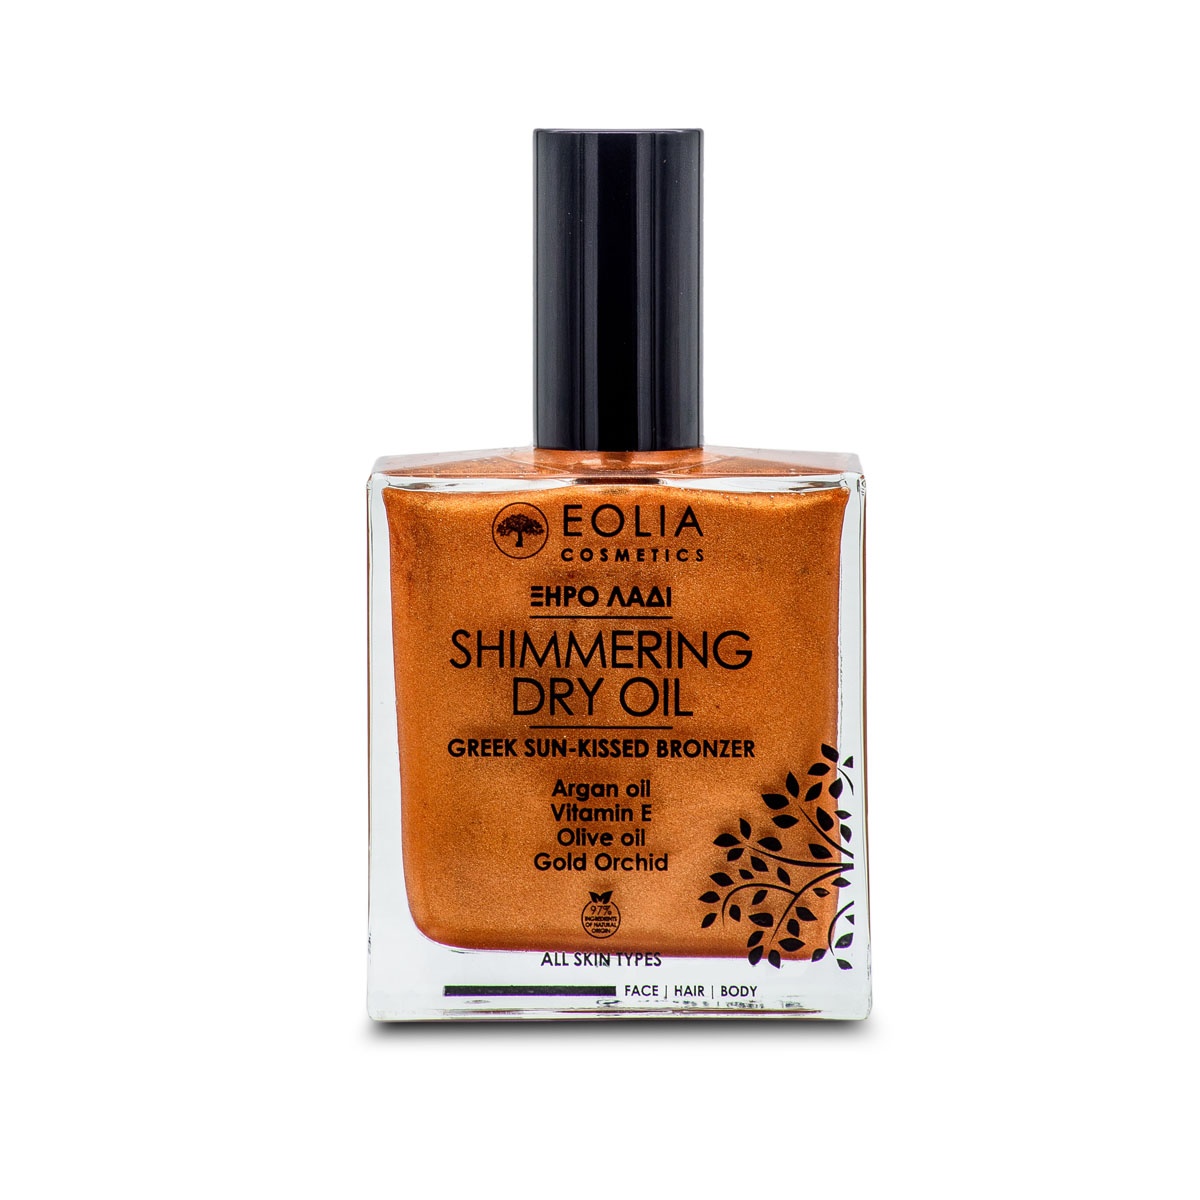 SHIMMERING DRY OIL – GREEK SUN KISSED BRONZER – The Beauty Naturals